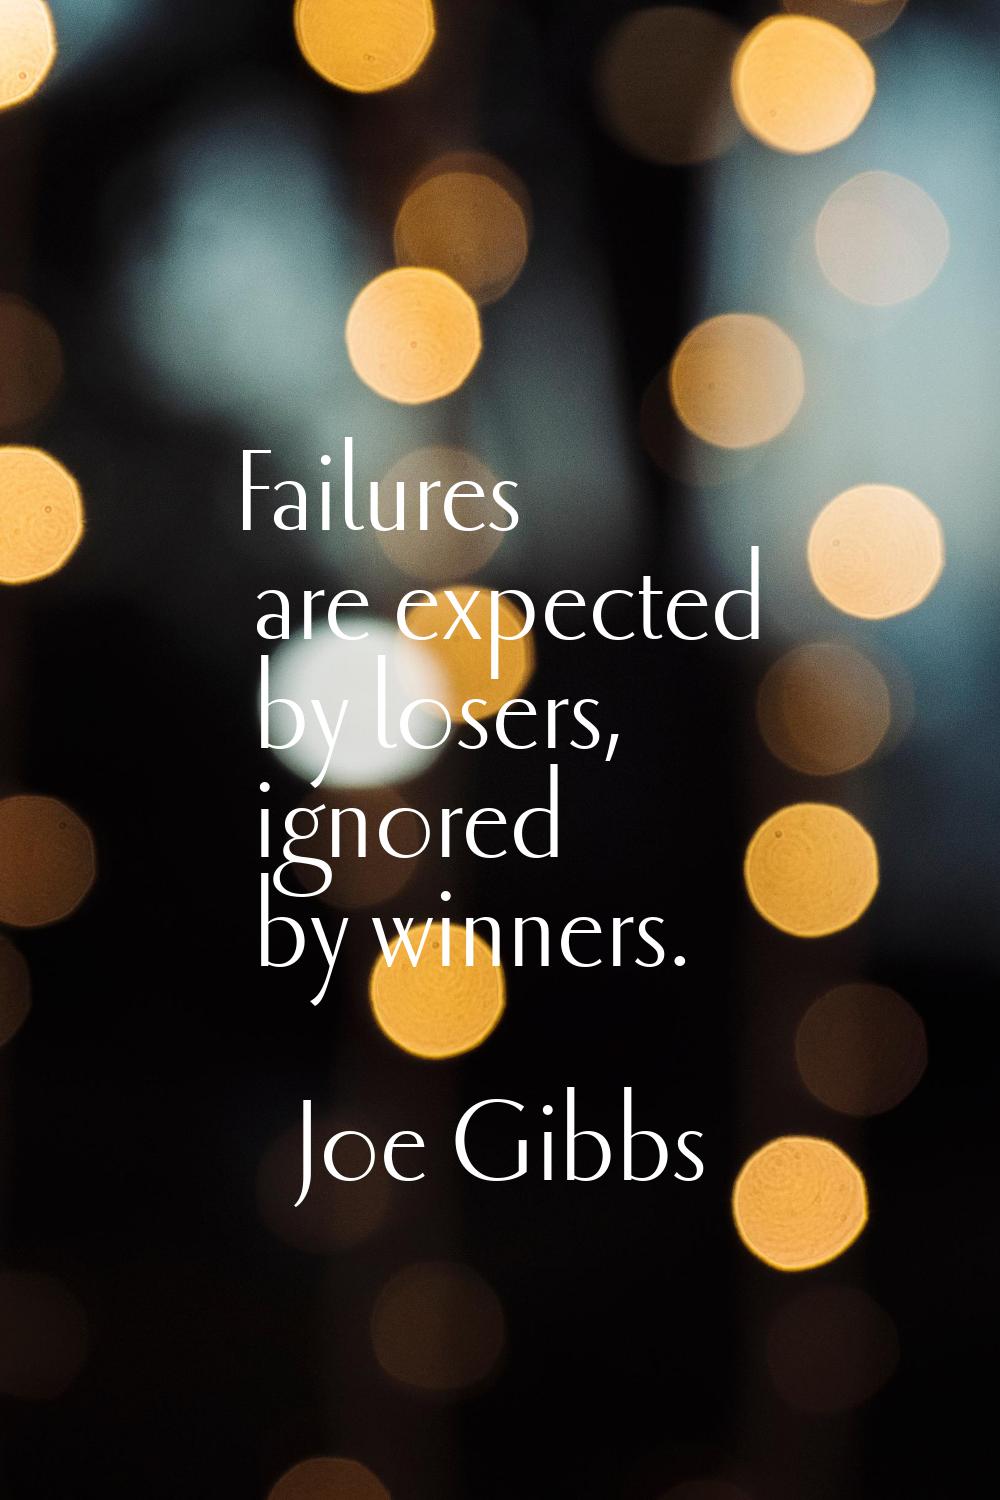 Failures are expected by losers, ignored by winners.